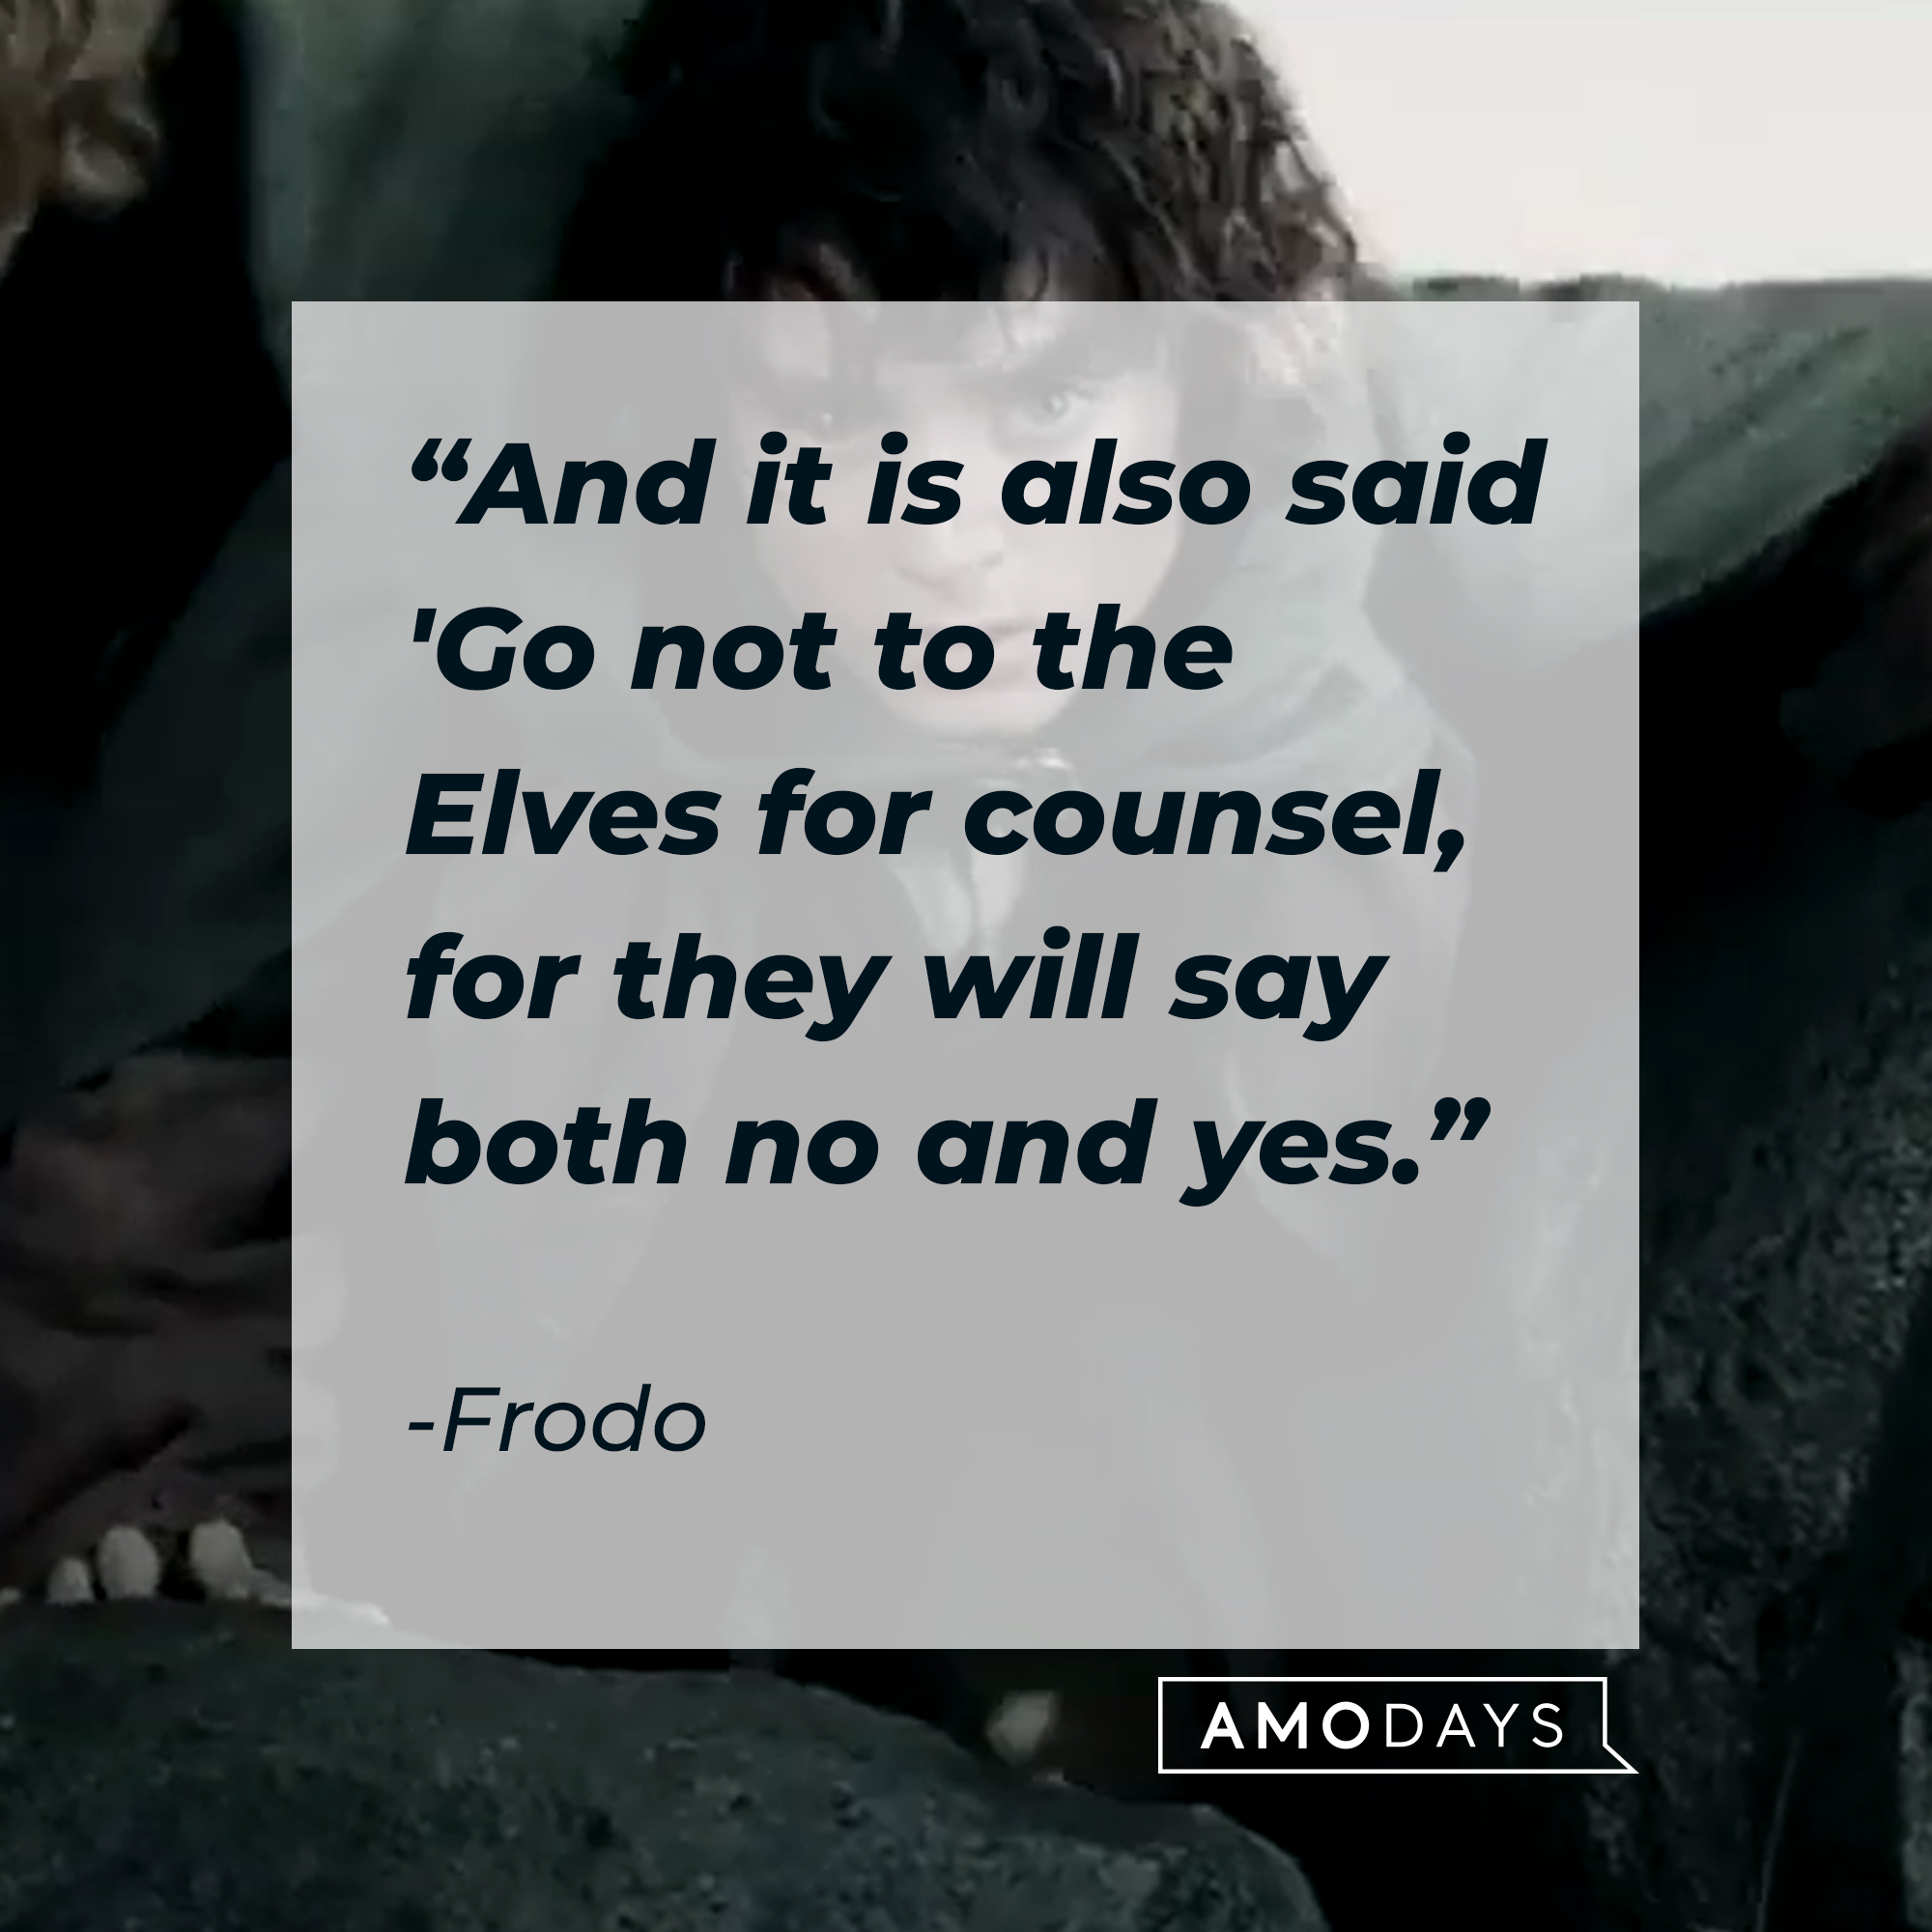 A photo of Frodo Baggins with the quote, ″'And it is also said 'Go not to the Elves for counsel, for they will say both no and yes.'" | Source: Facebook/lordoftheringstrilogy